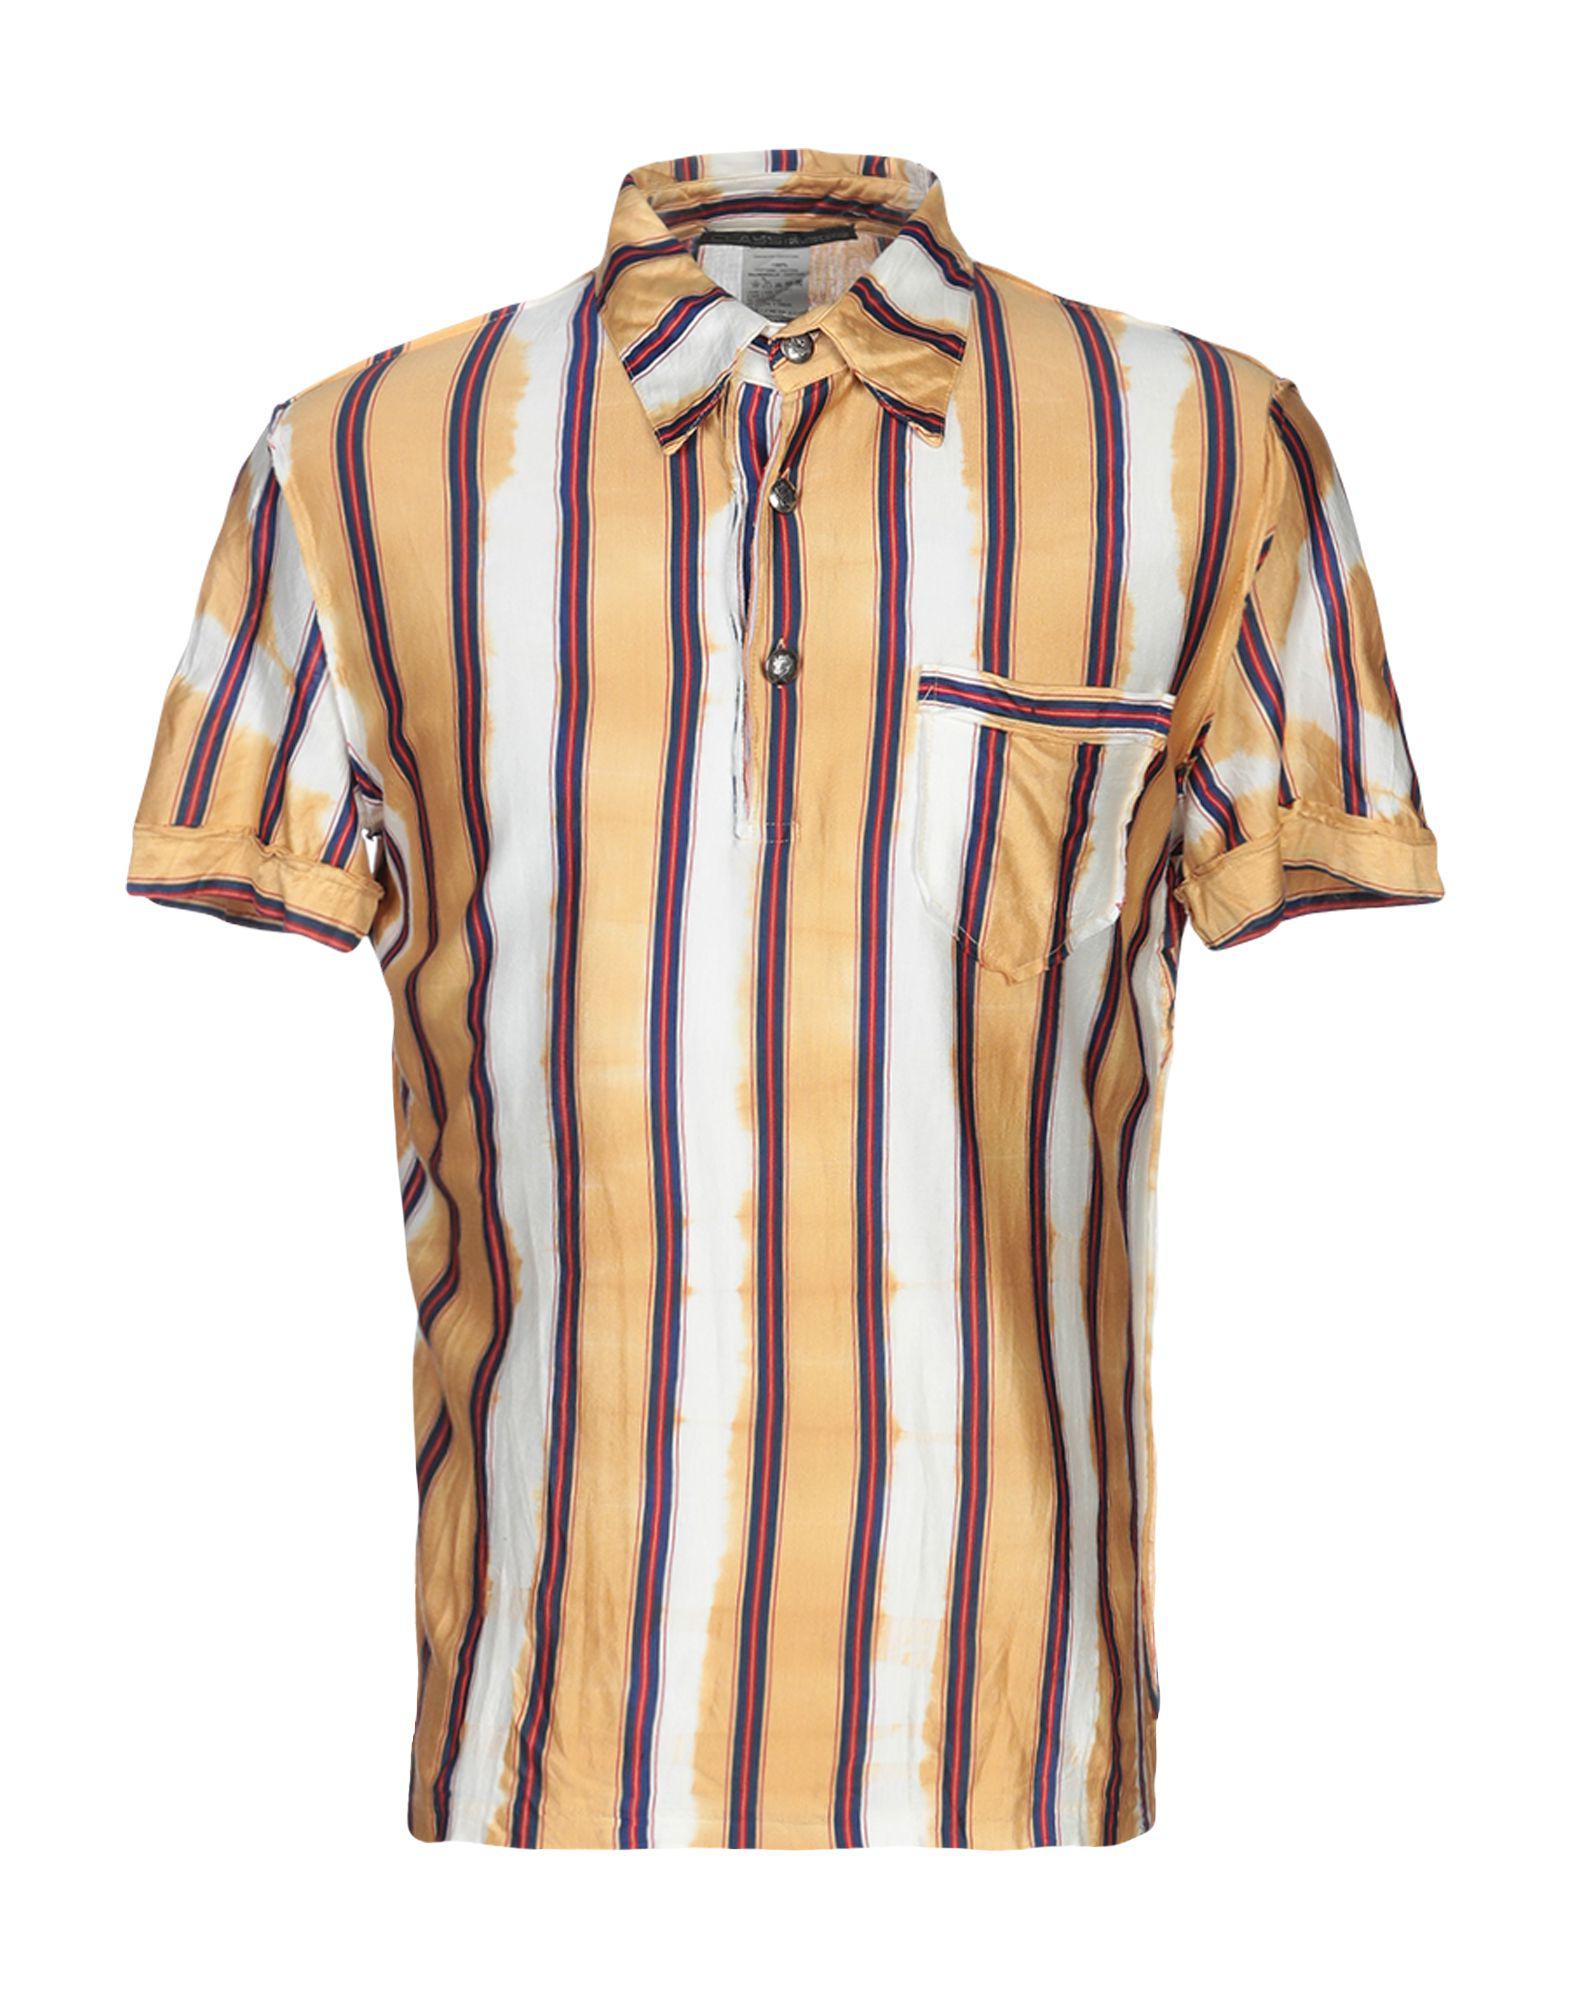 Lyst - Class Roberto Cavalli Polo Shirt in Natural for Men